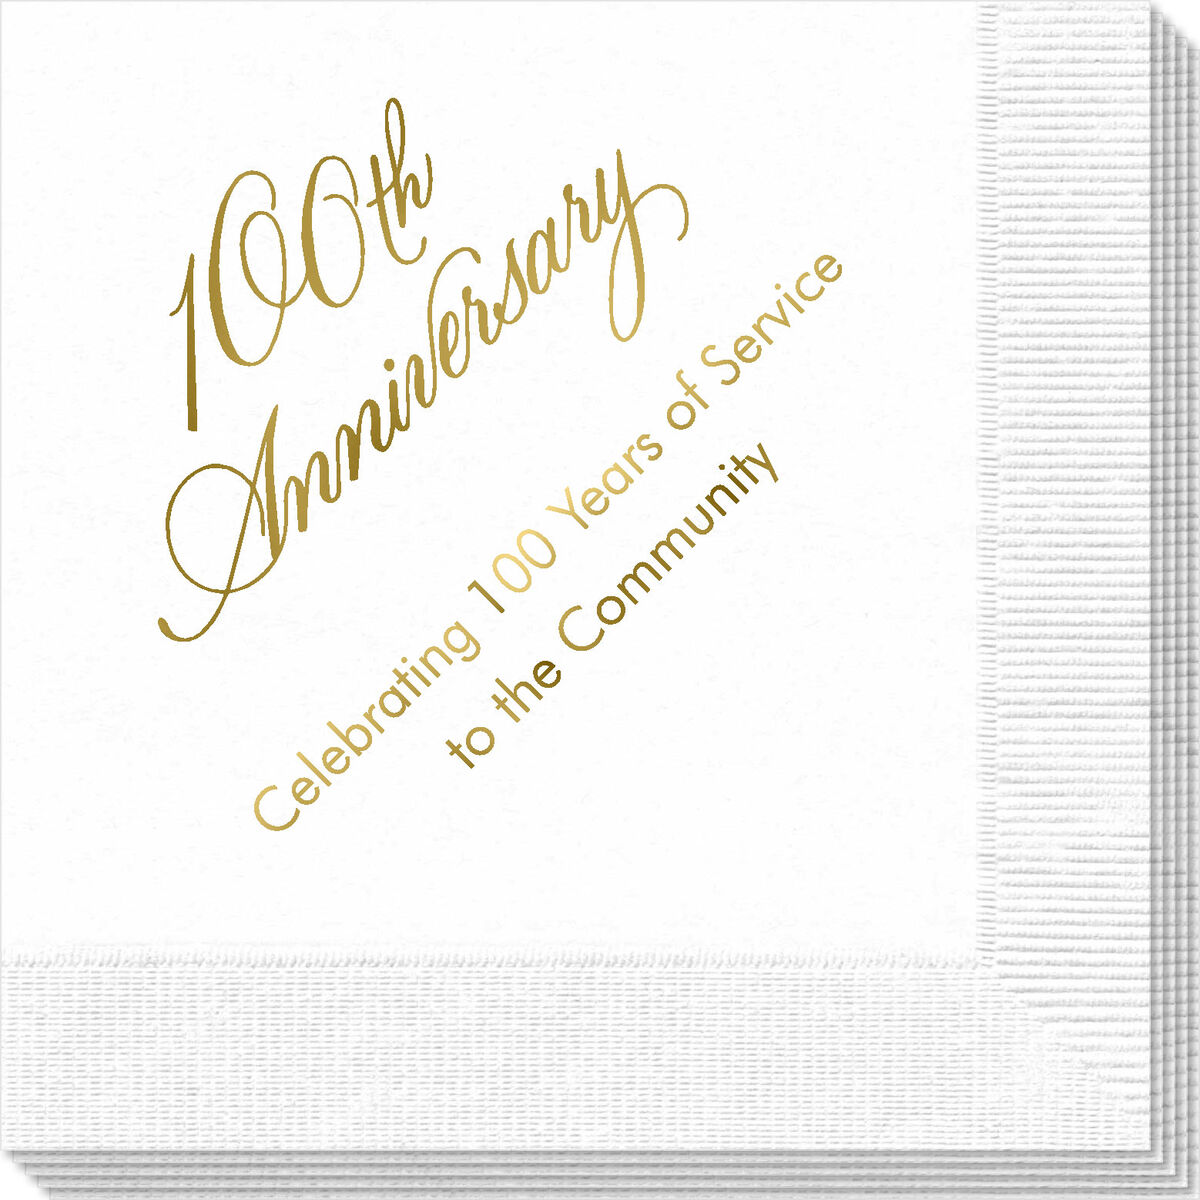 18-2 ply Bright and Bold 30th Birthday Anniversary Lunch Napkins 